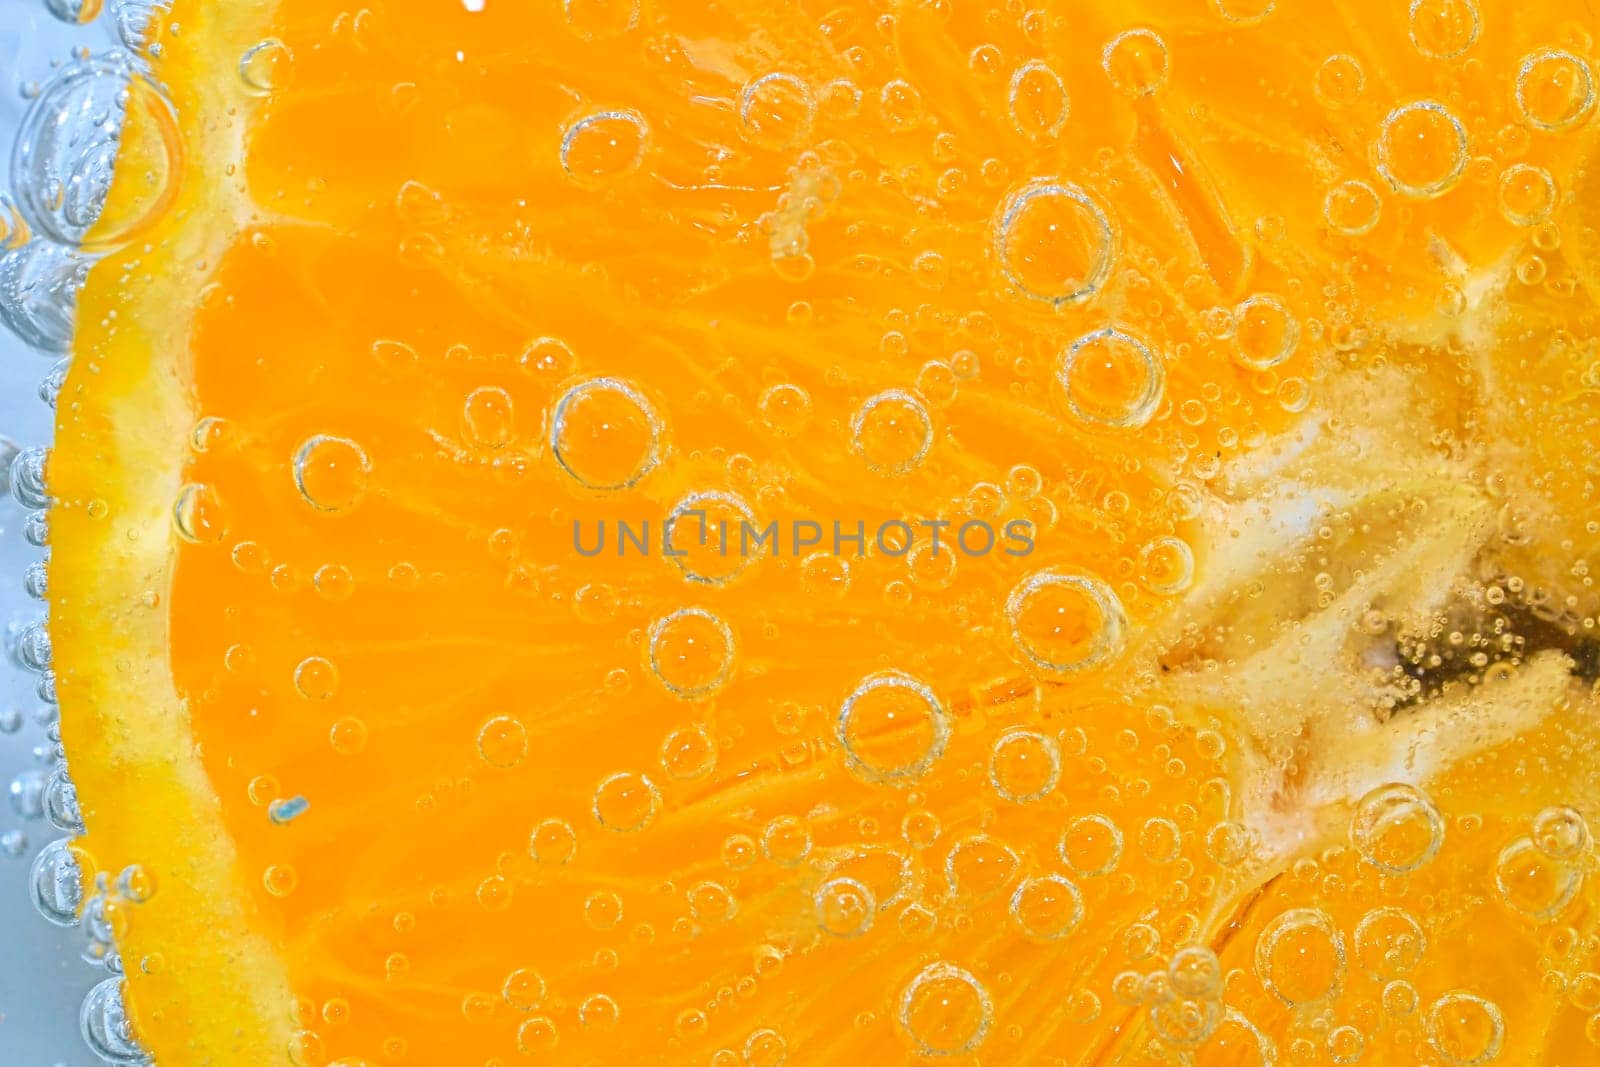 Slice of orange fruit in sparkling water. Orange fruit slice covered by bubbles in carbonated water. Orange fruit slice in water with bubbles. Close-up, macro horizontal image. by roman_nerud